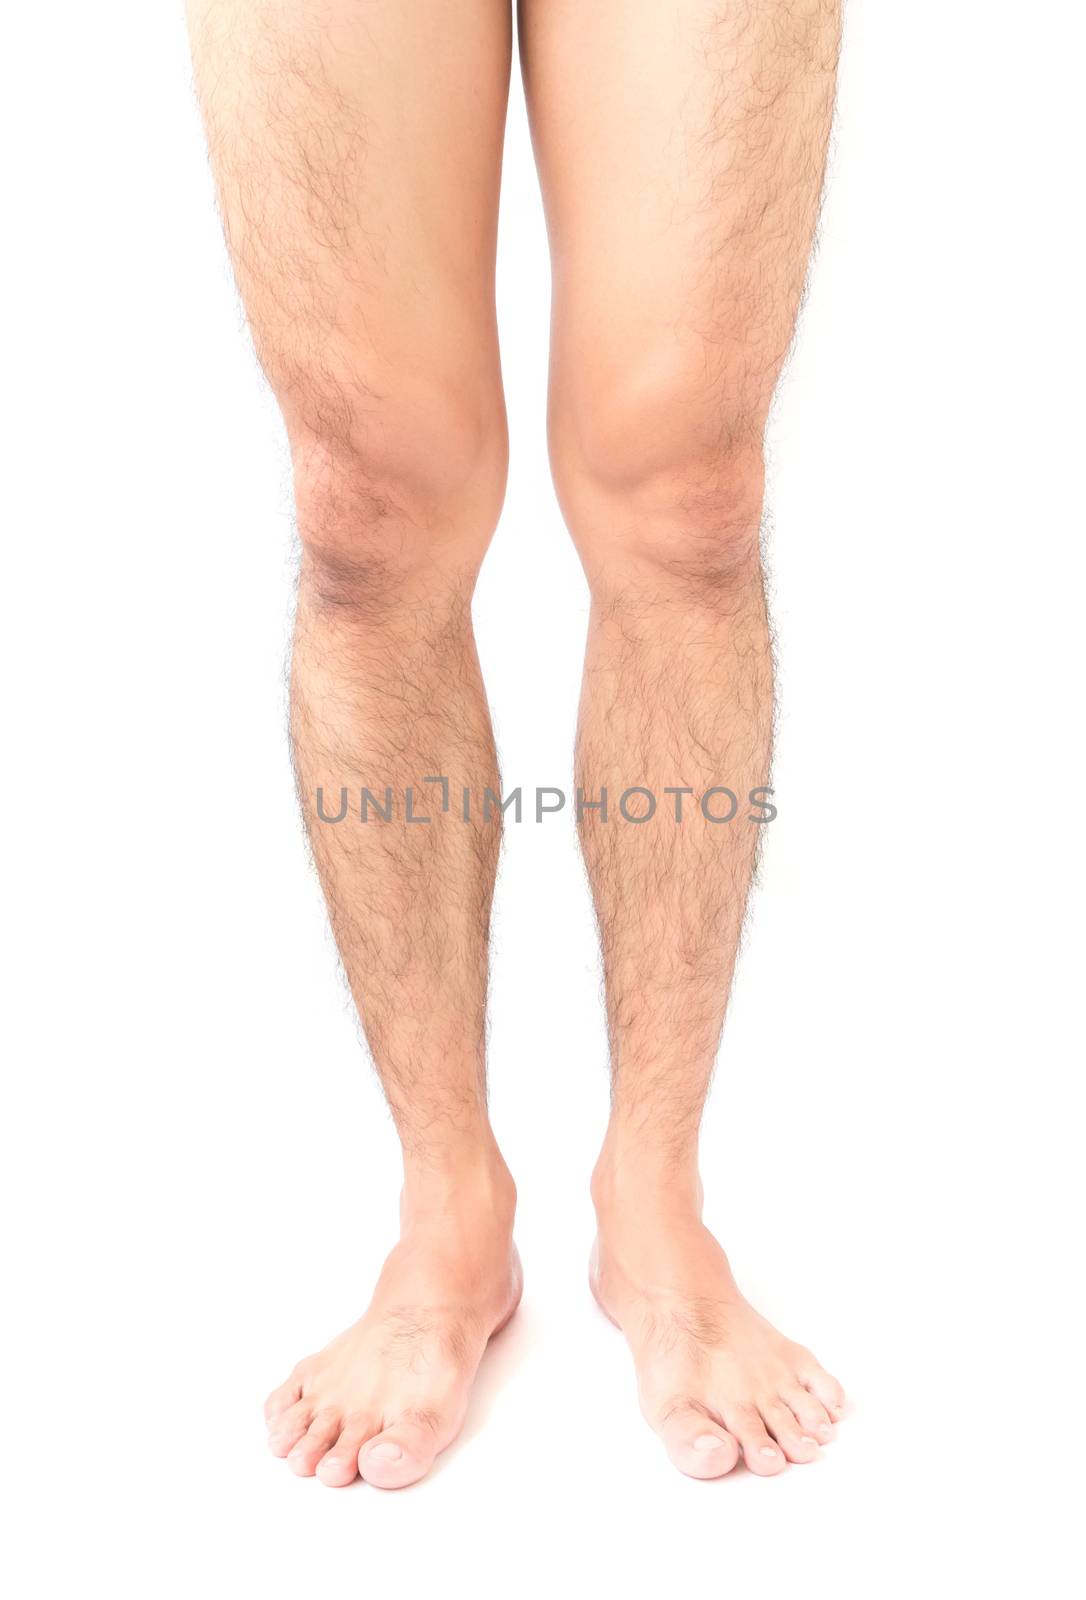 Closeup legs men skin and hairy with white background, health ca by pt.pongsak@gmail.com